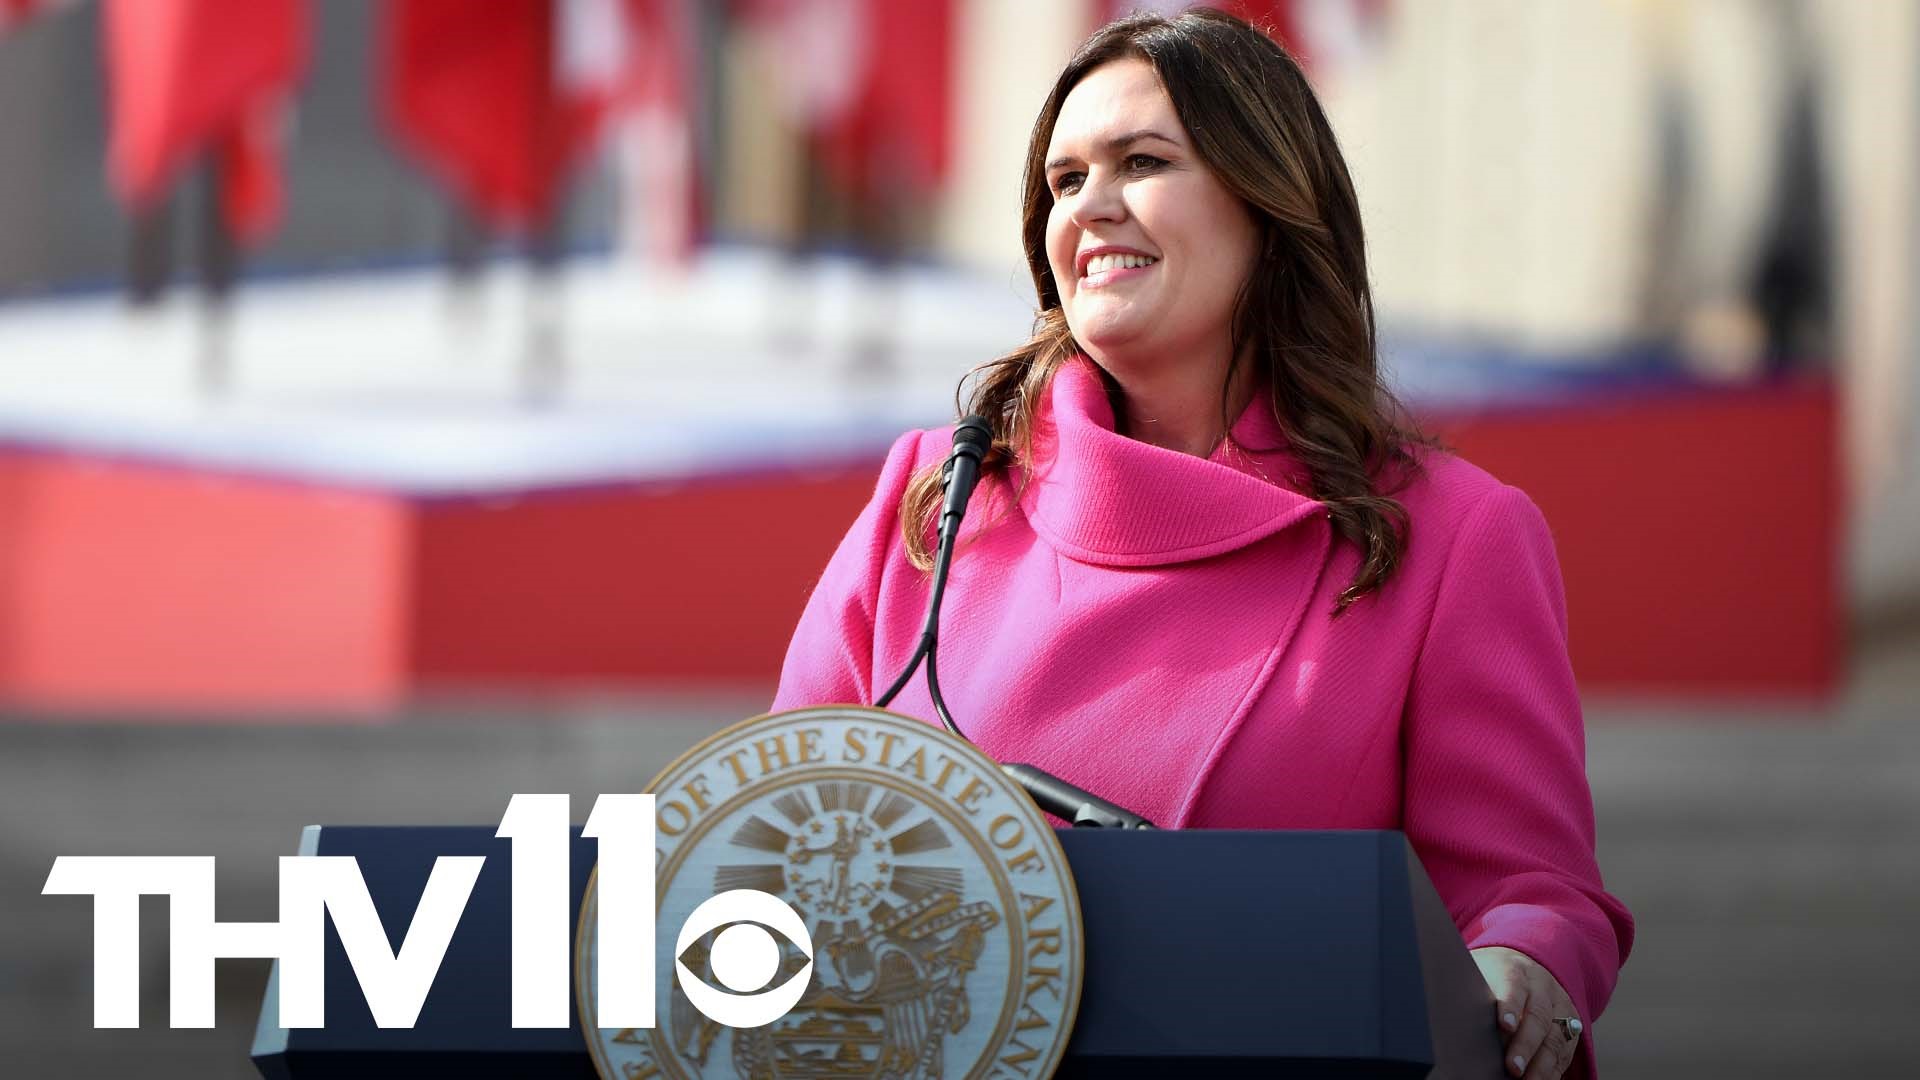 Governor Sarah Huckabee Sanders delivered an inaugural speech to celebrate her swearing-in as Arkansas's first woman governor.